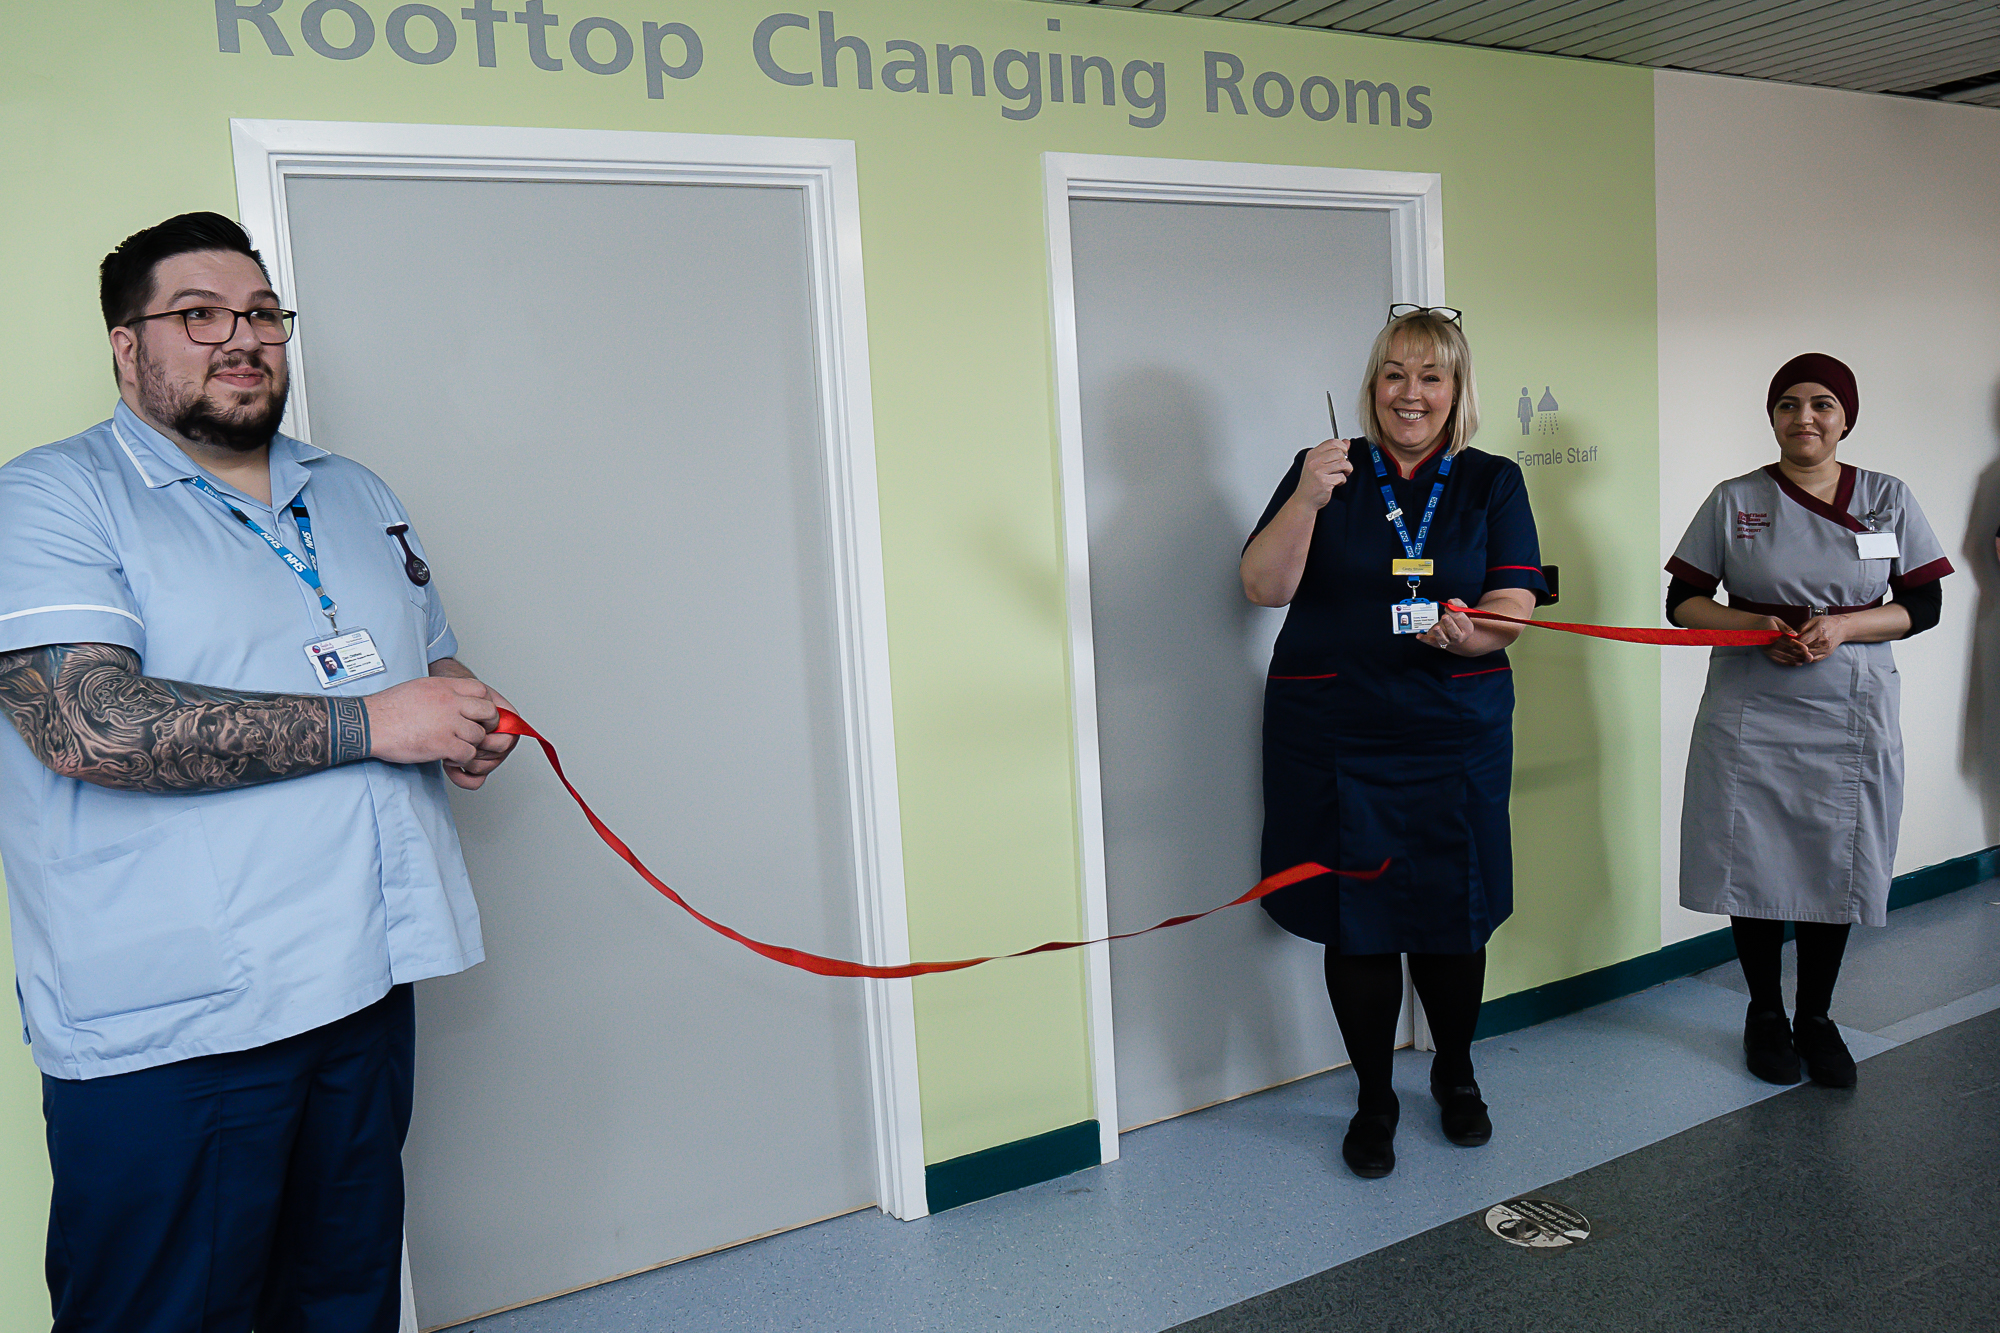 Chief Nurse, Cindy Storer, cuts a red ribbon held by a healthcare support worker and student nurse to open some new changing rooms